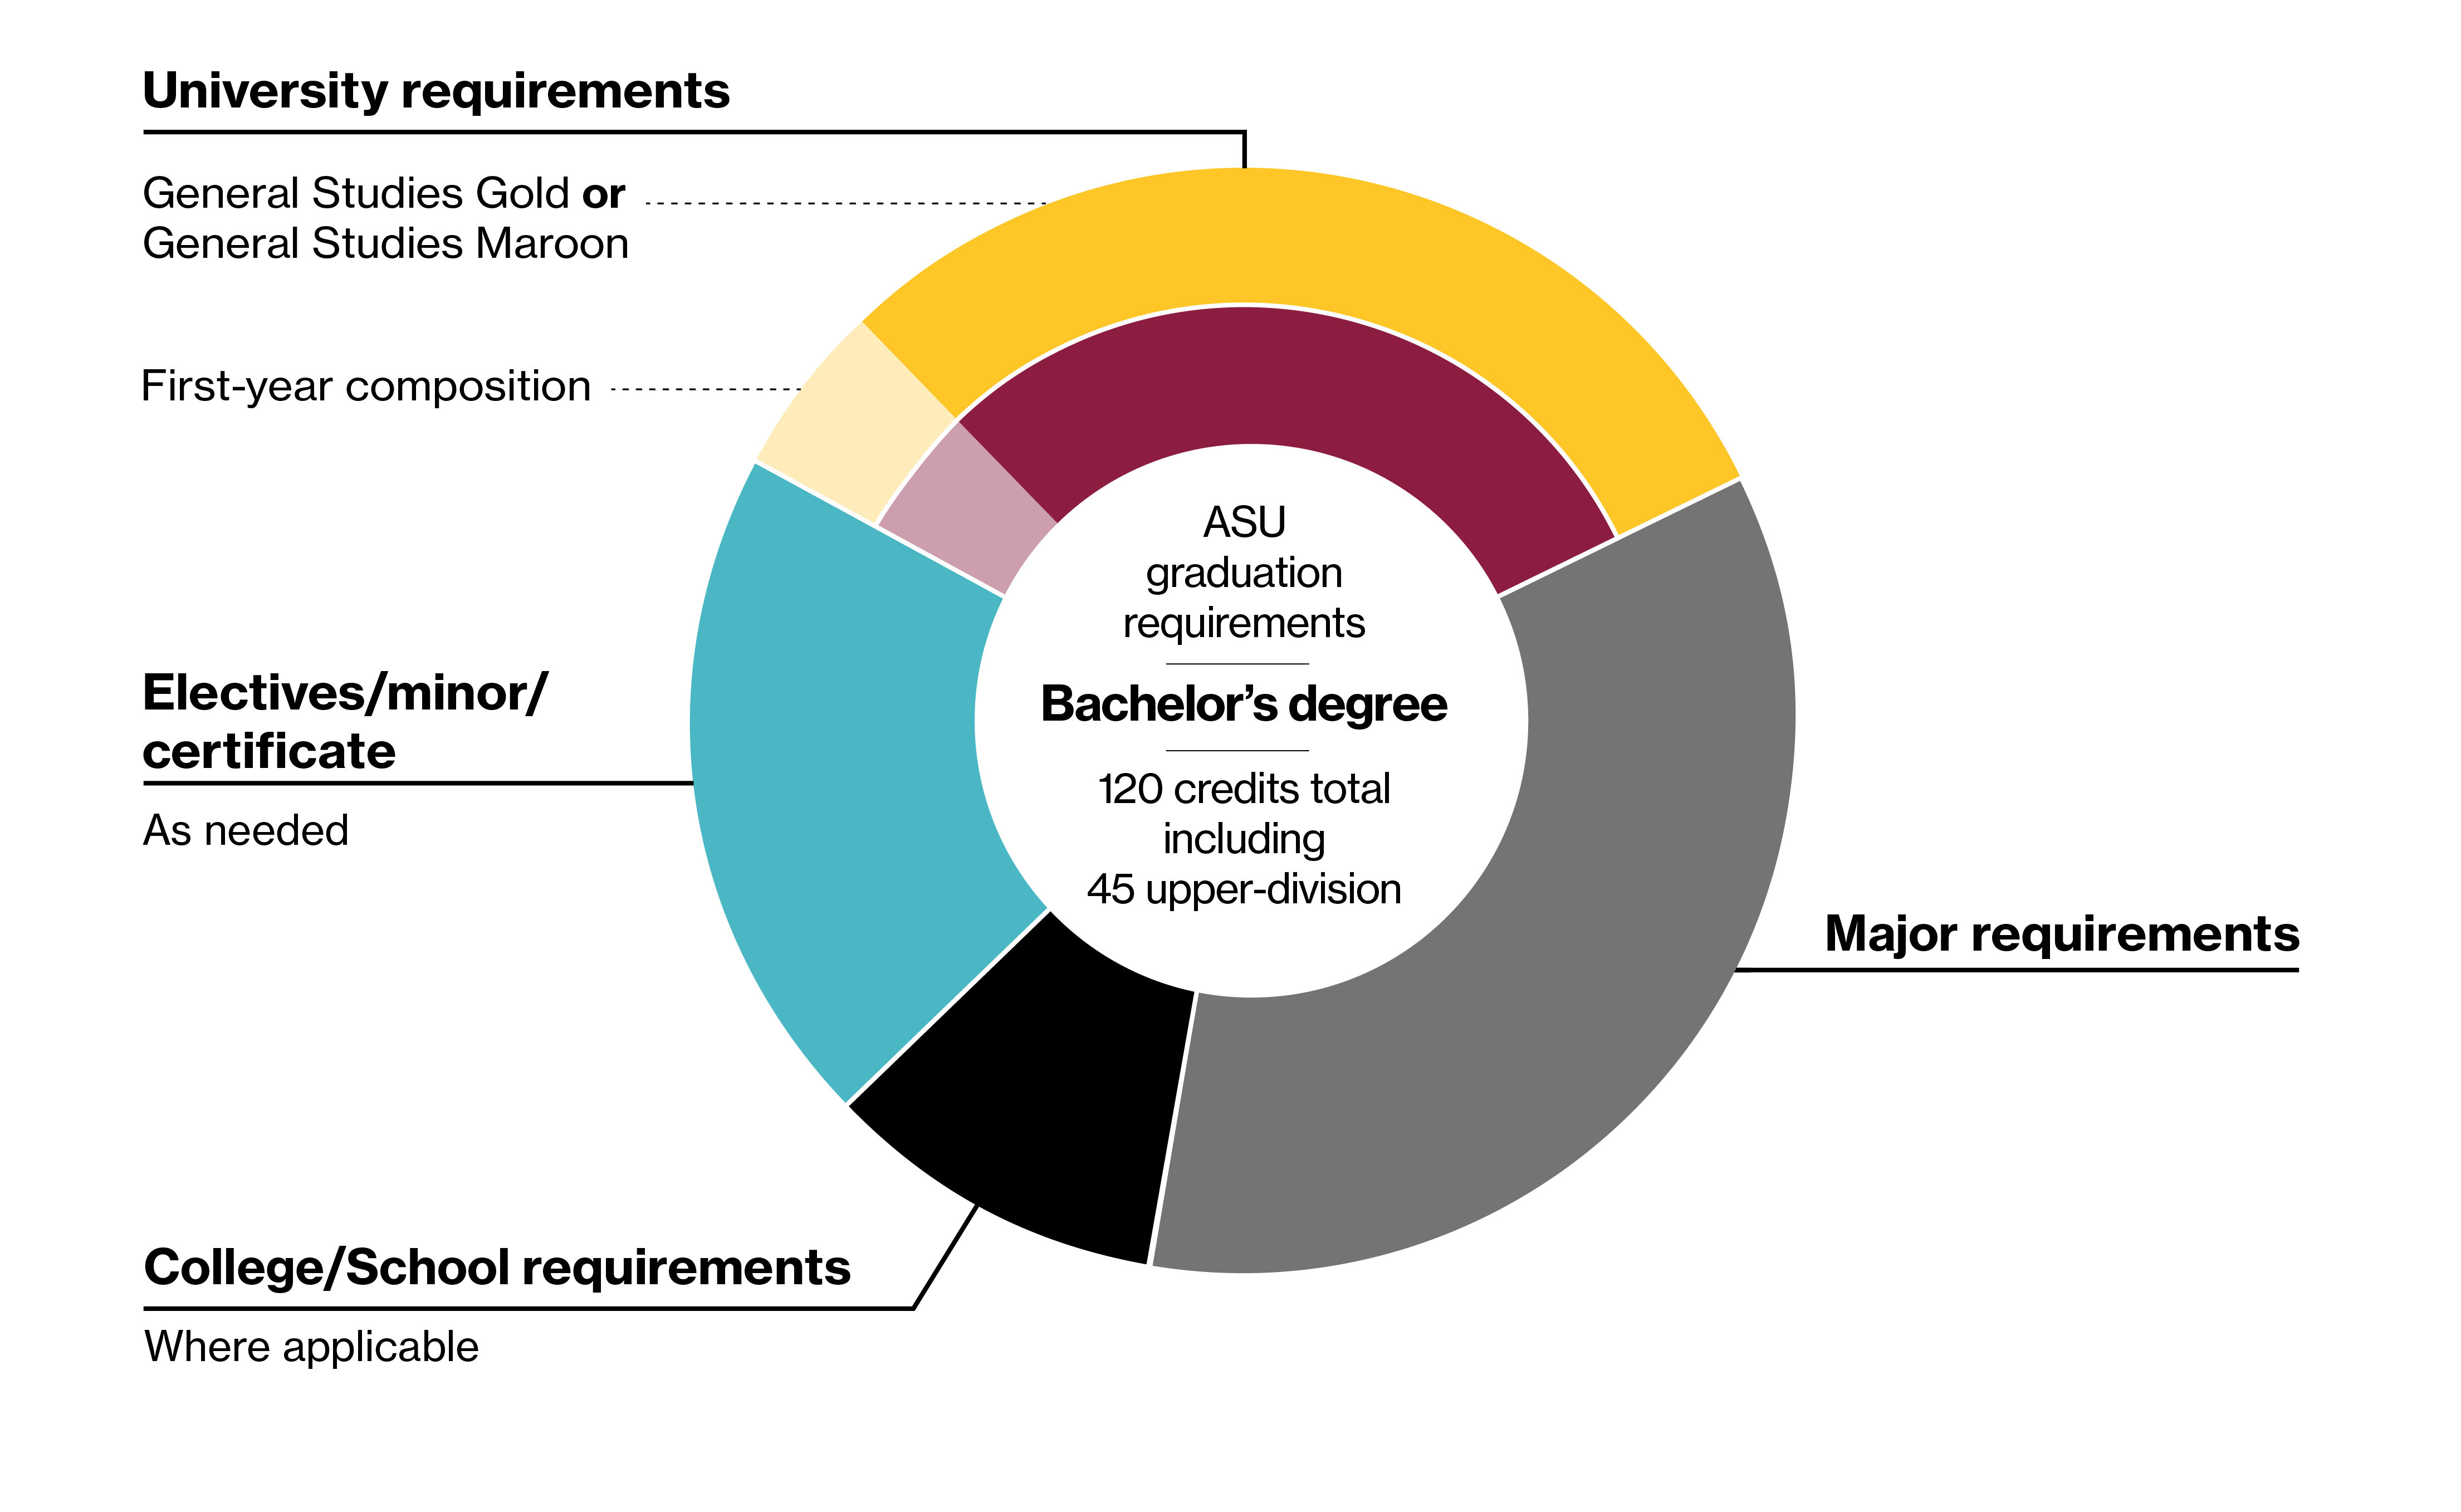 Graphic depicting the breakdown of 120 credits into general studies, major and college requirements, and elective/certificate/minor requirements